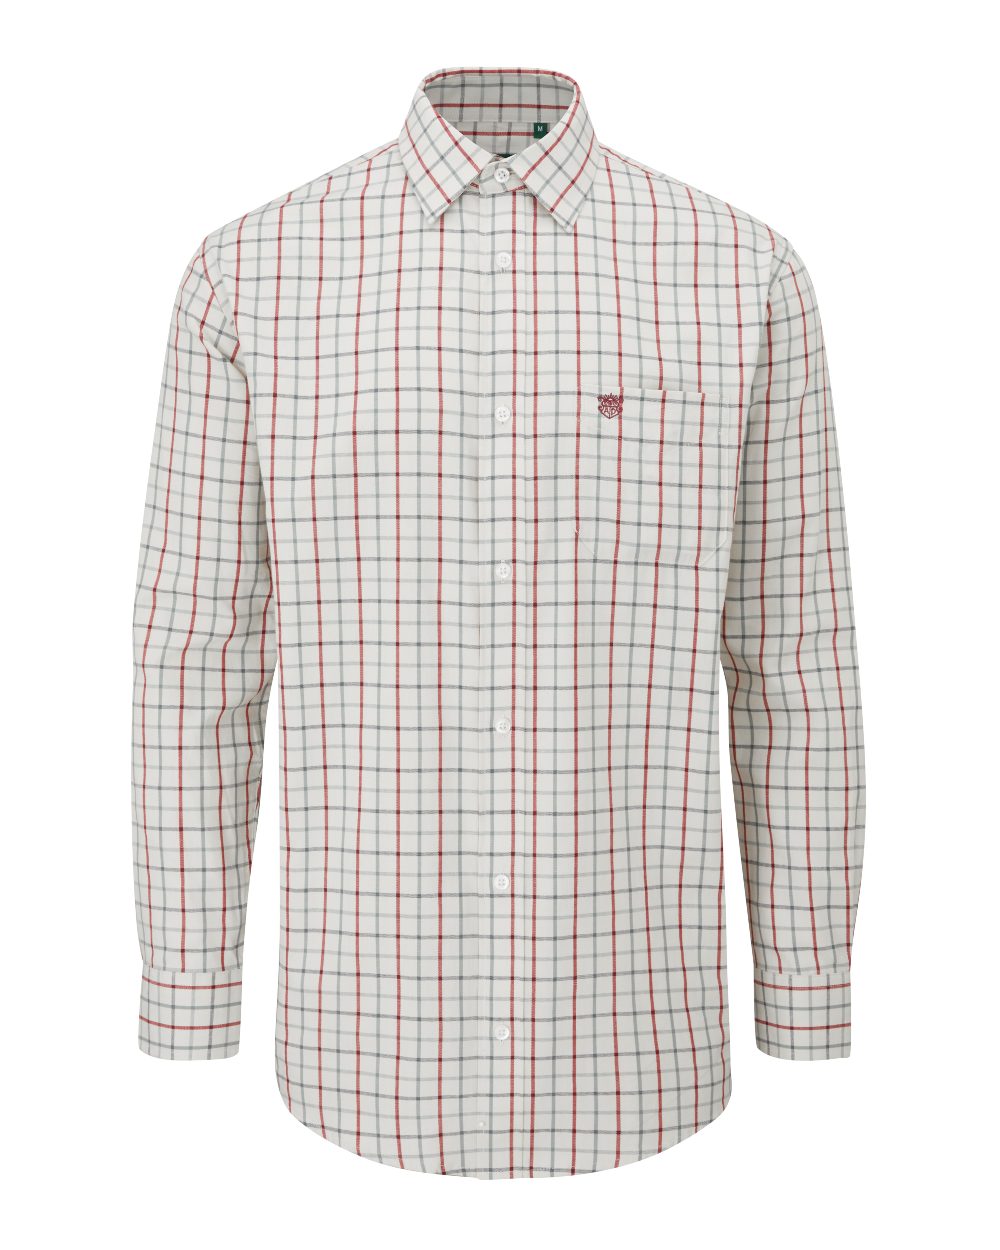 Alan Paine Ilkley Shirt in Red/Grey 